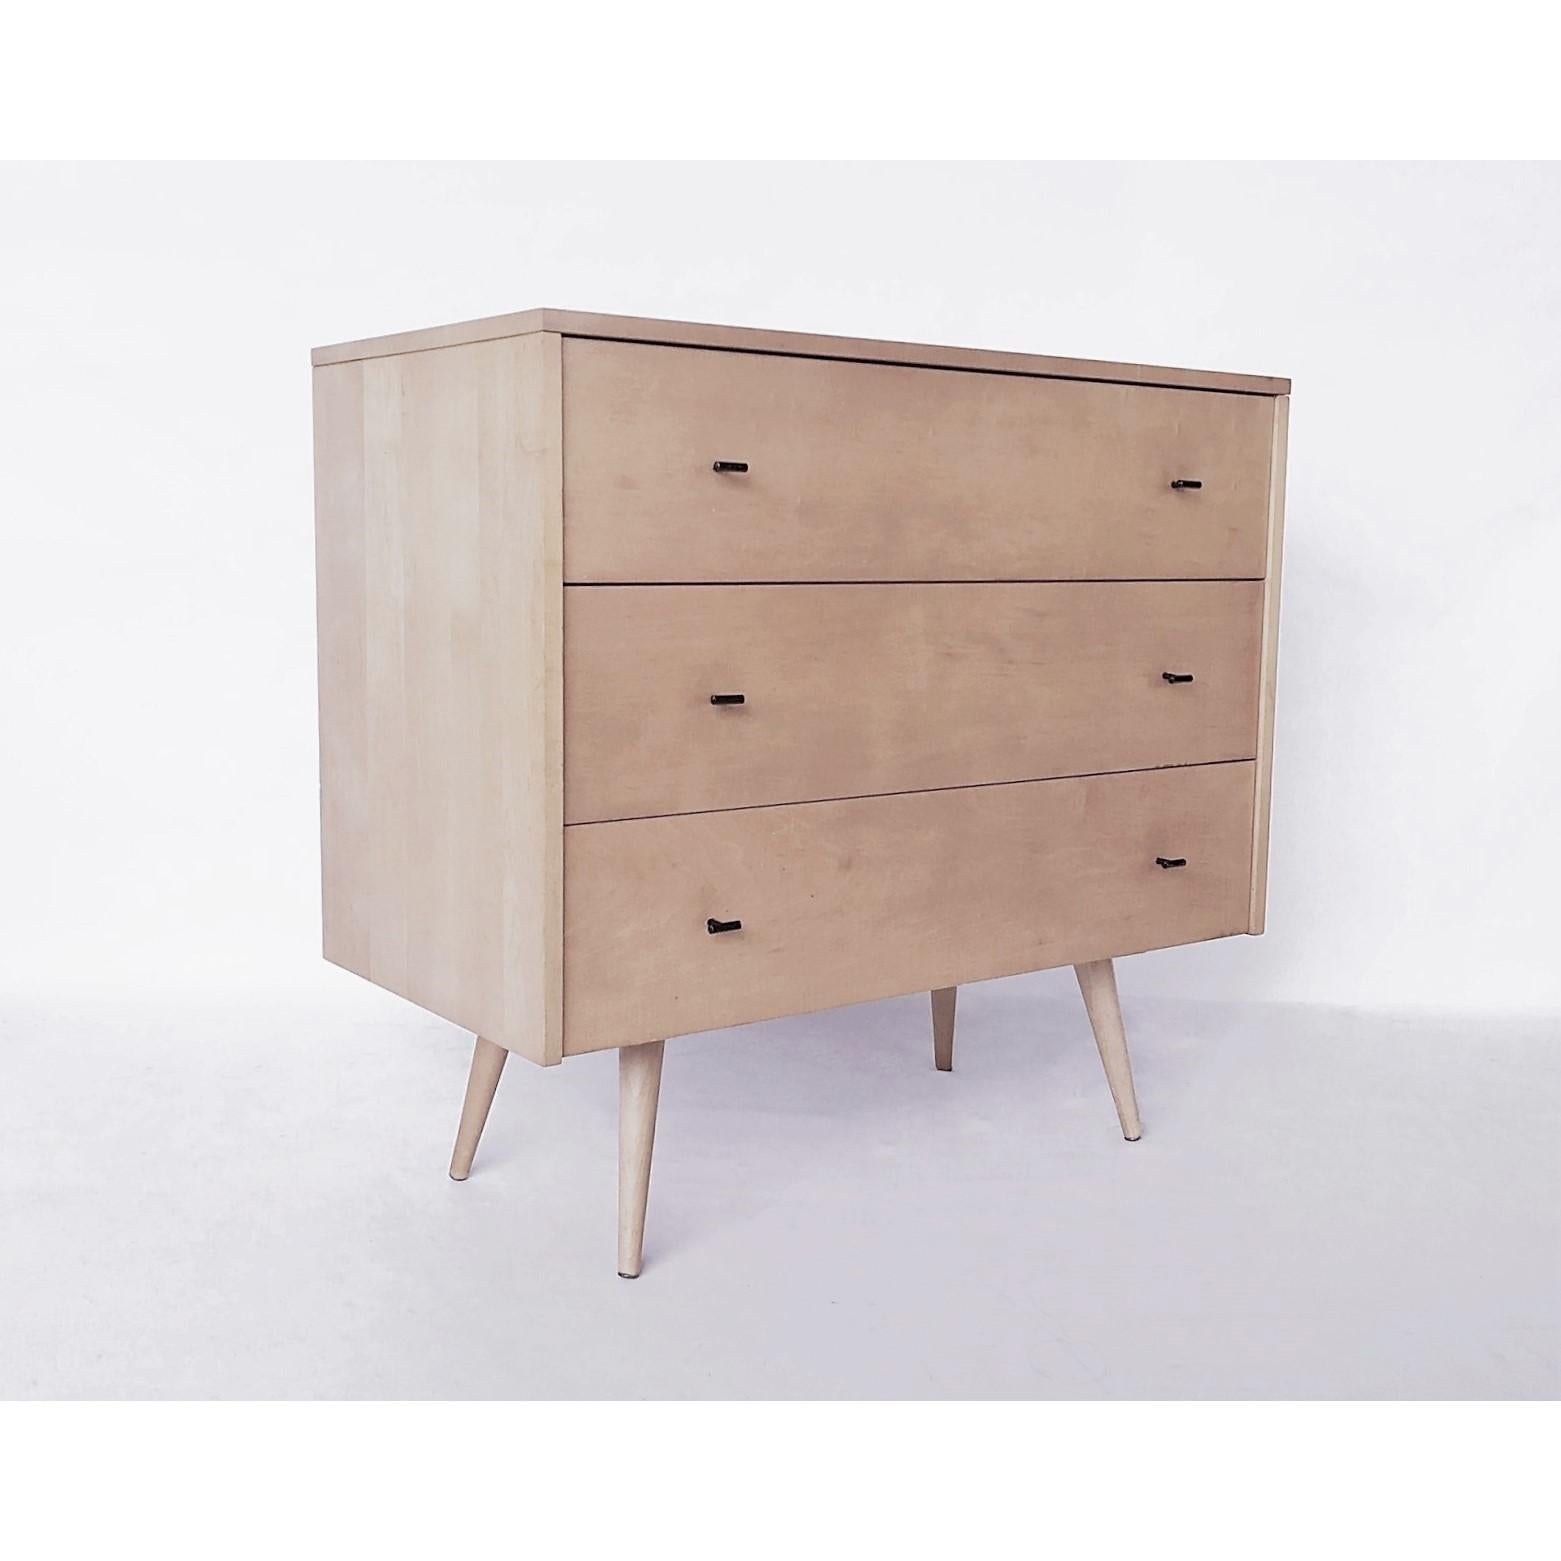 These matching pair of solid maple three-drawer chests designed by Paul McCobb as part of his Planner Group. The handles are 